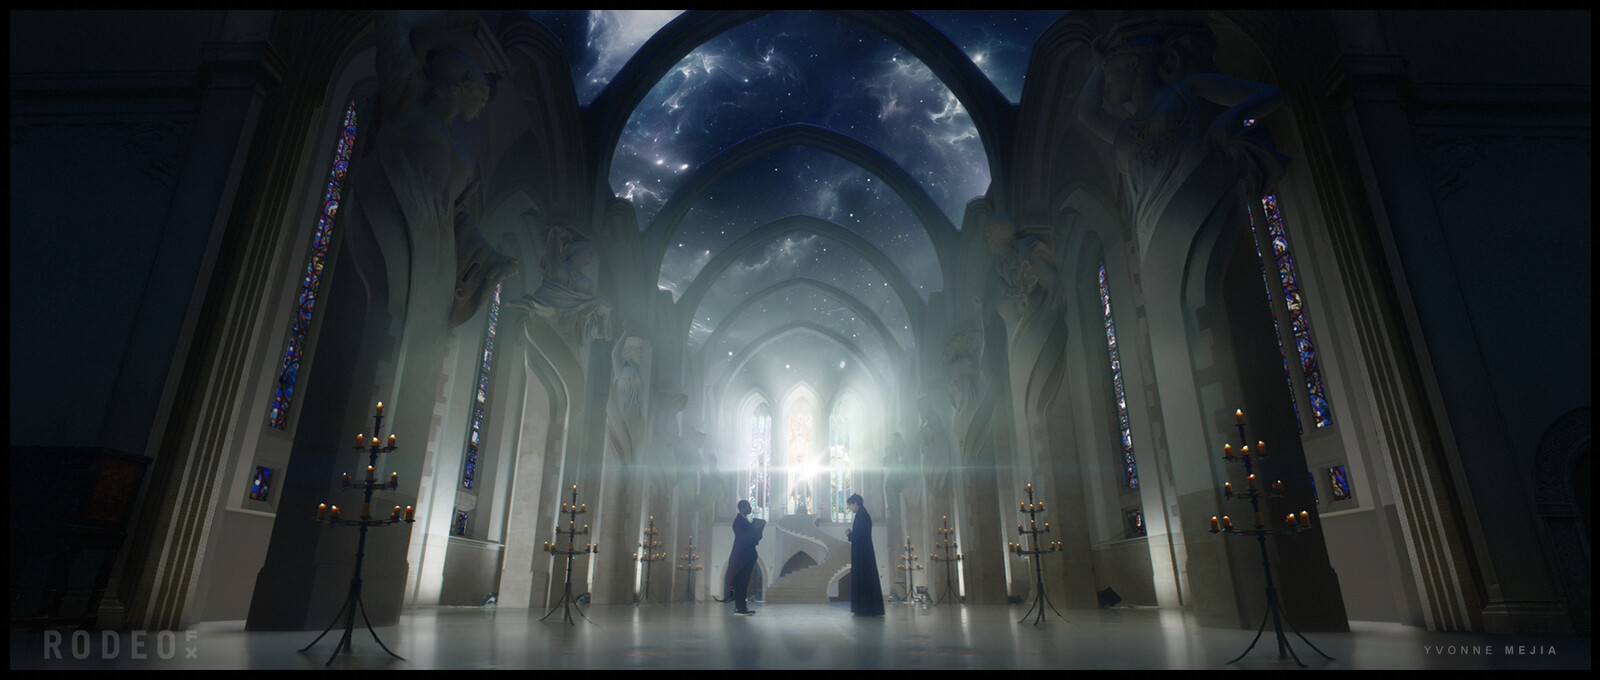 Post-prod concept over plate. Modifications to church and cosmic sky added above.